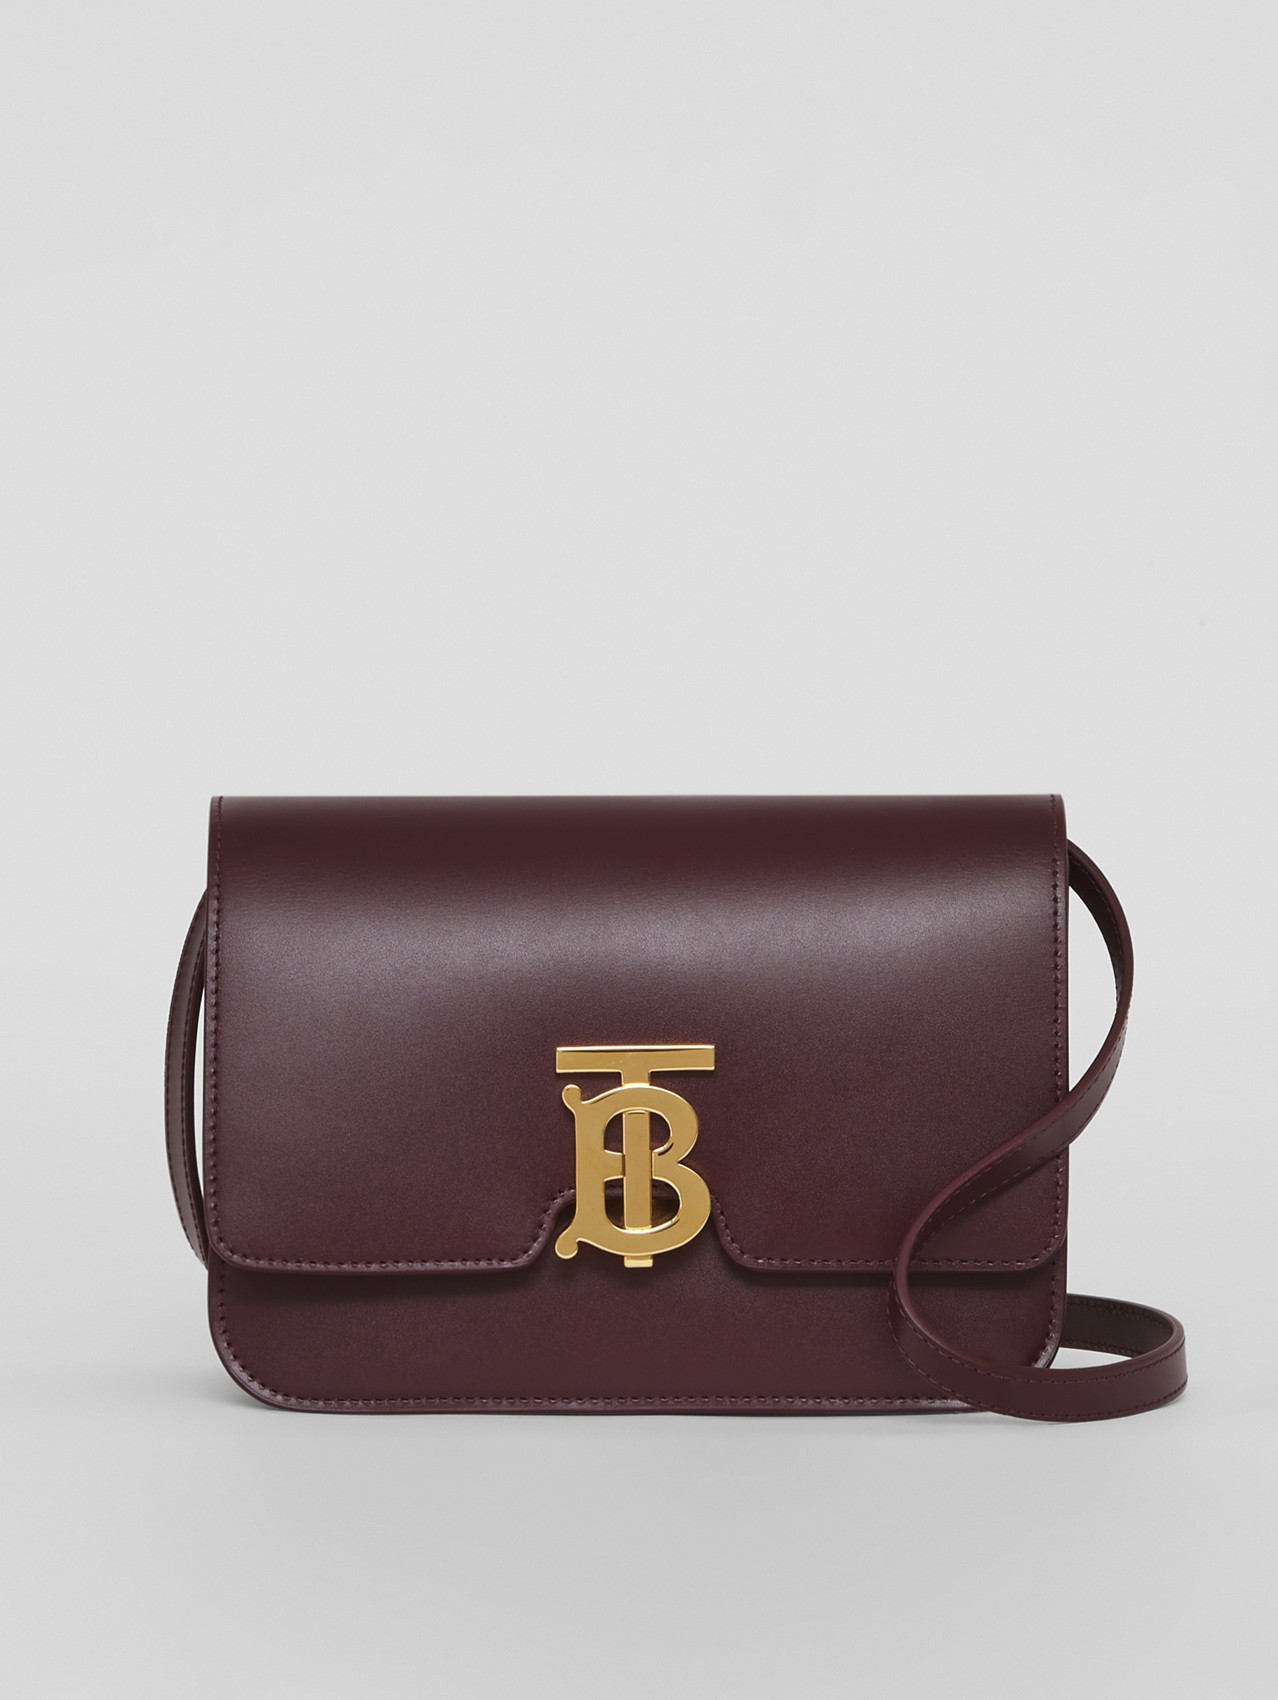 Small Leather TB Bag in Deep Maroon